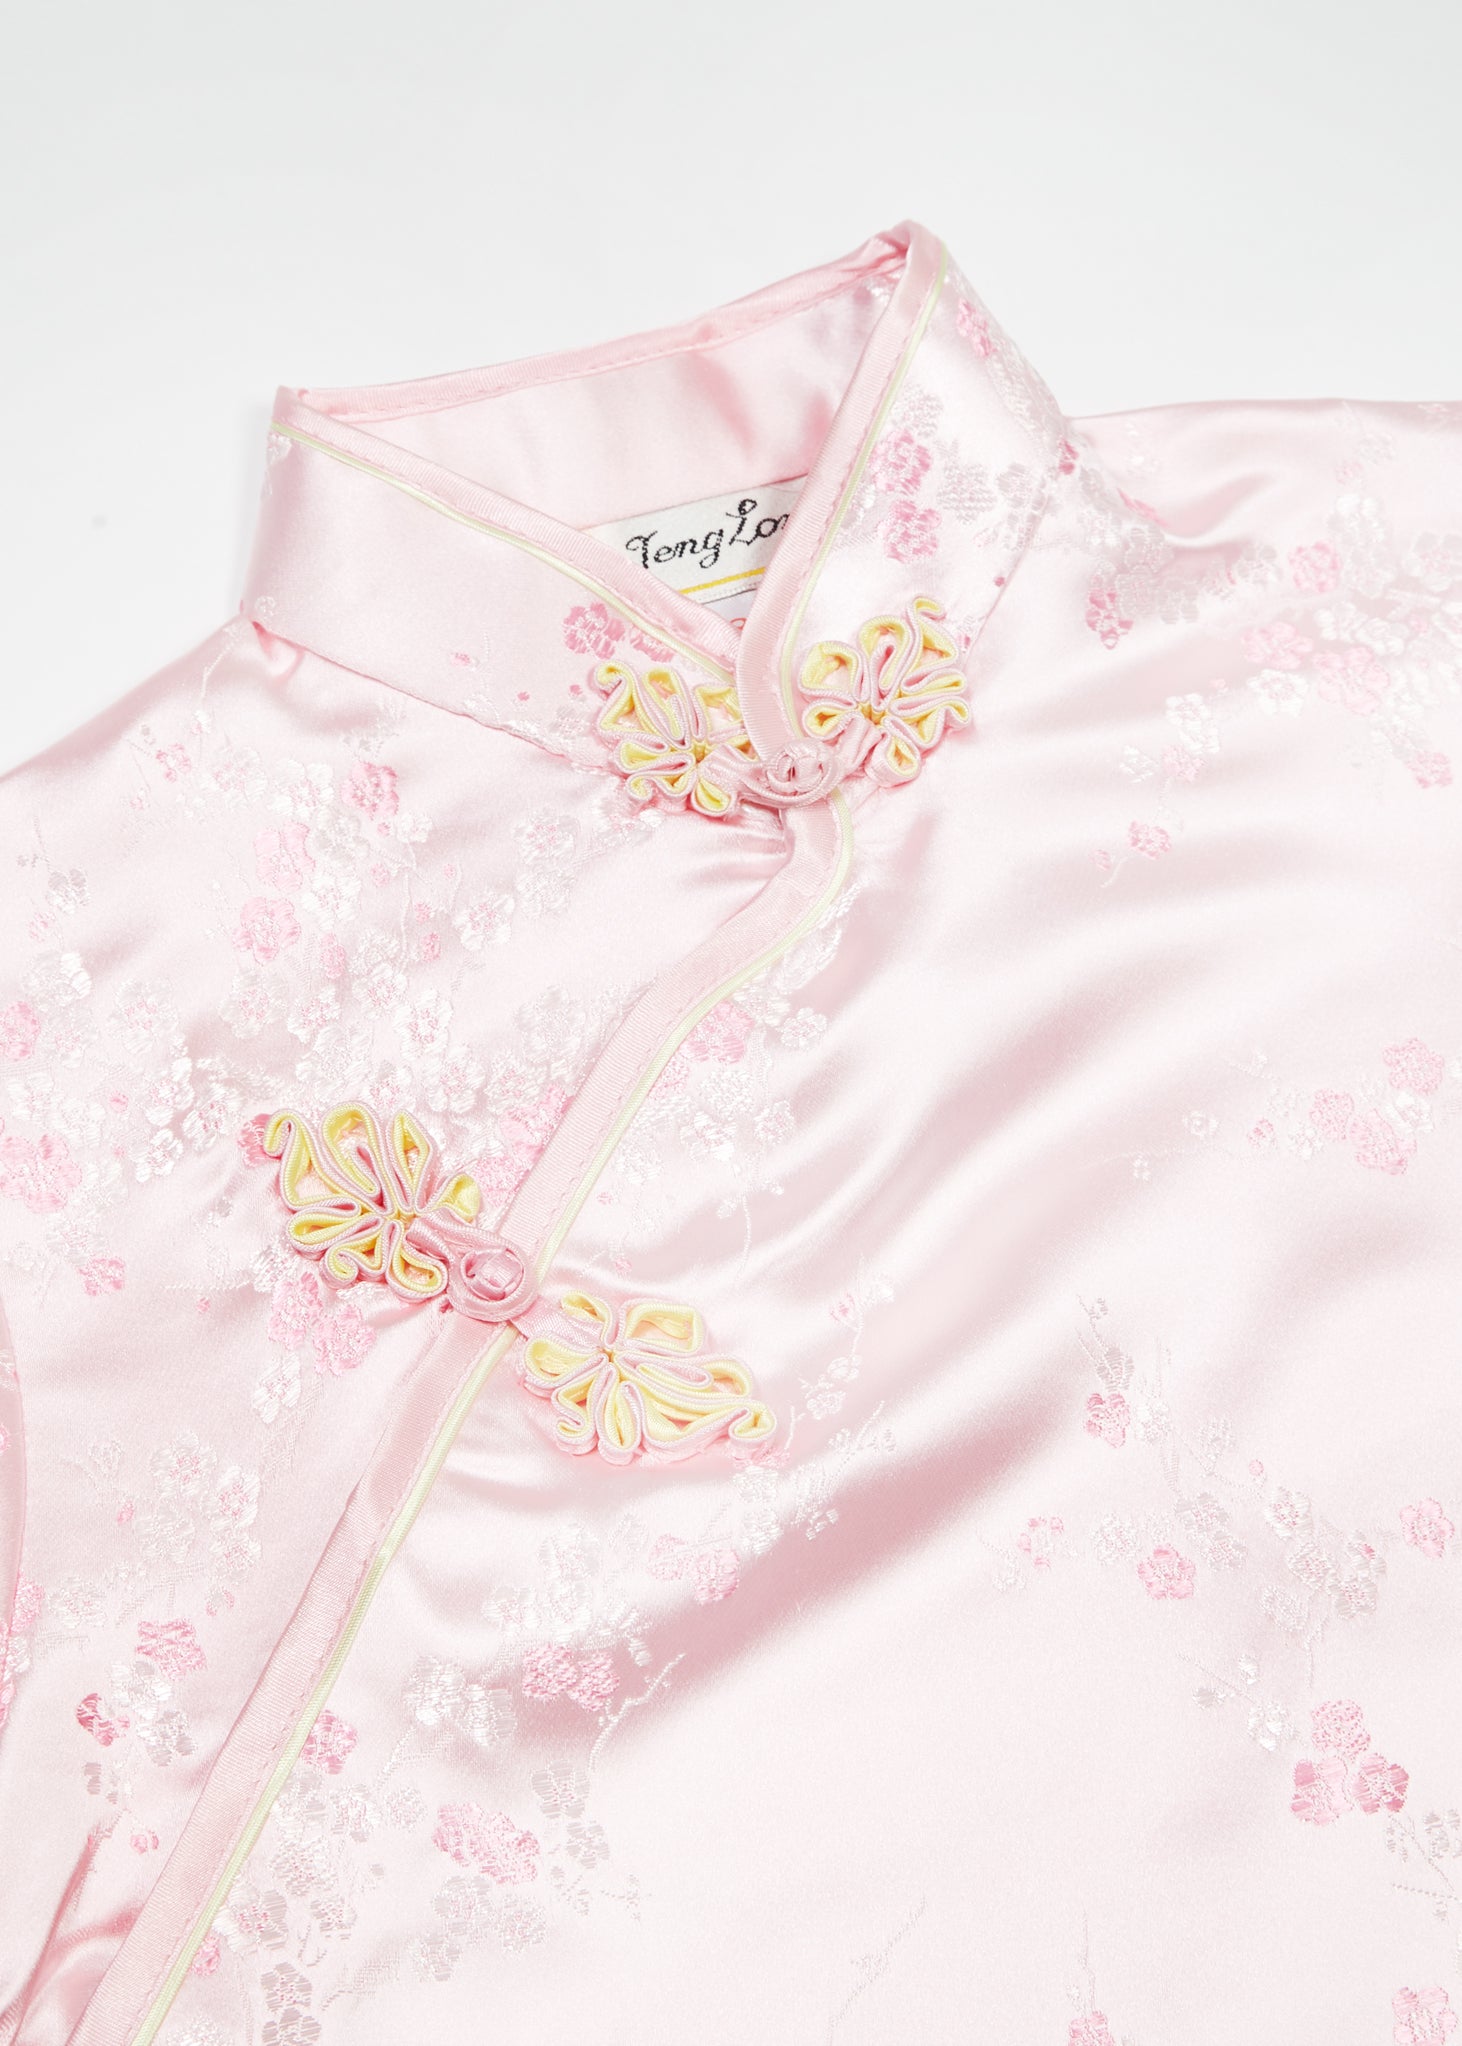 Bound edge mandarin collar and aysmmetric fastening which closes with hand stitched flower and knot frog fastenings in an accent shade. Short sleeves, side zip, curved hem into modest side splits with contrast binding and accent piping.